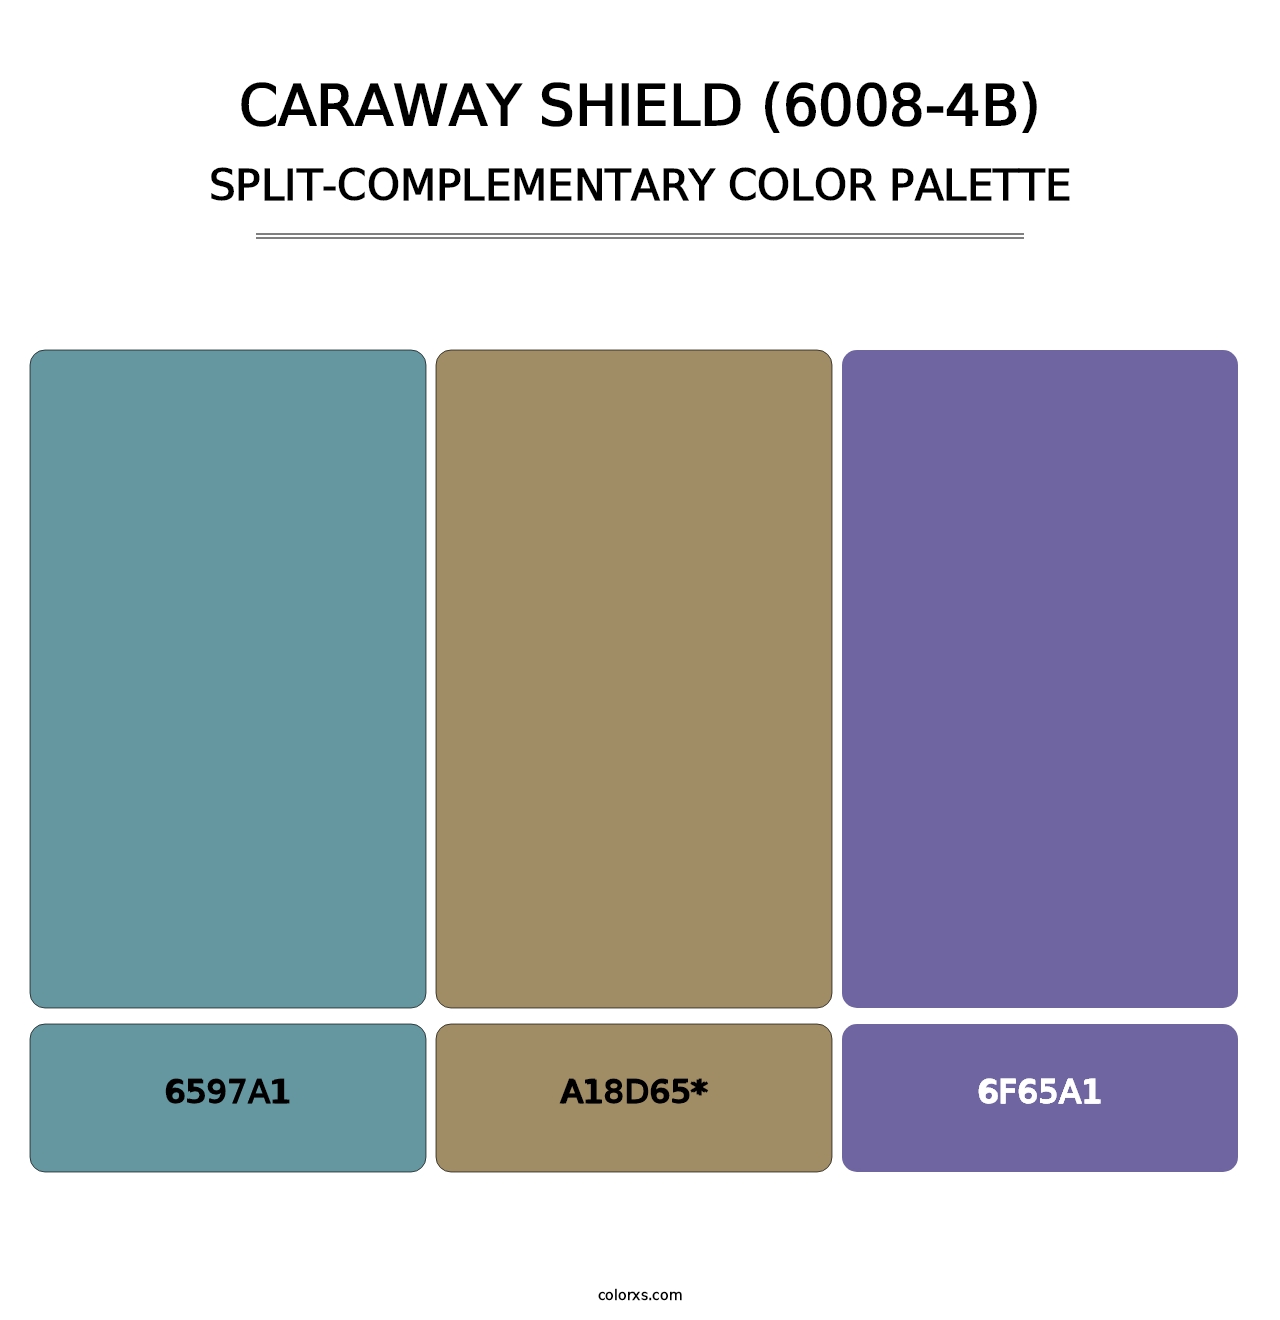 Caraway Shield (6008-4B) - Split-Complementary Color Palette